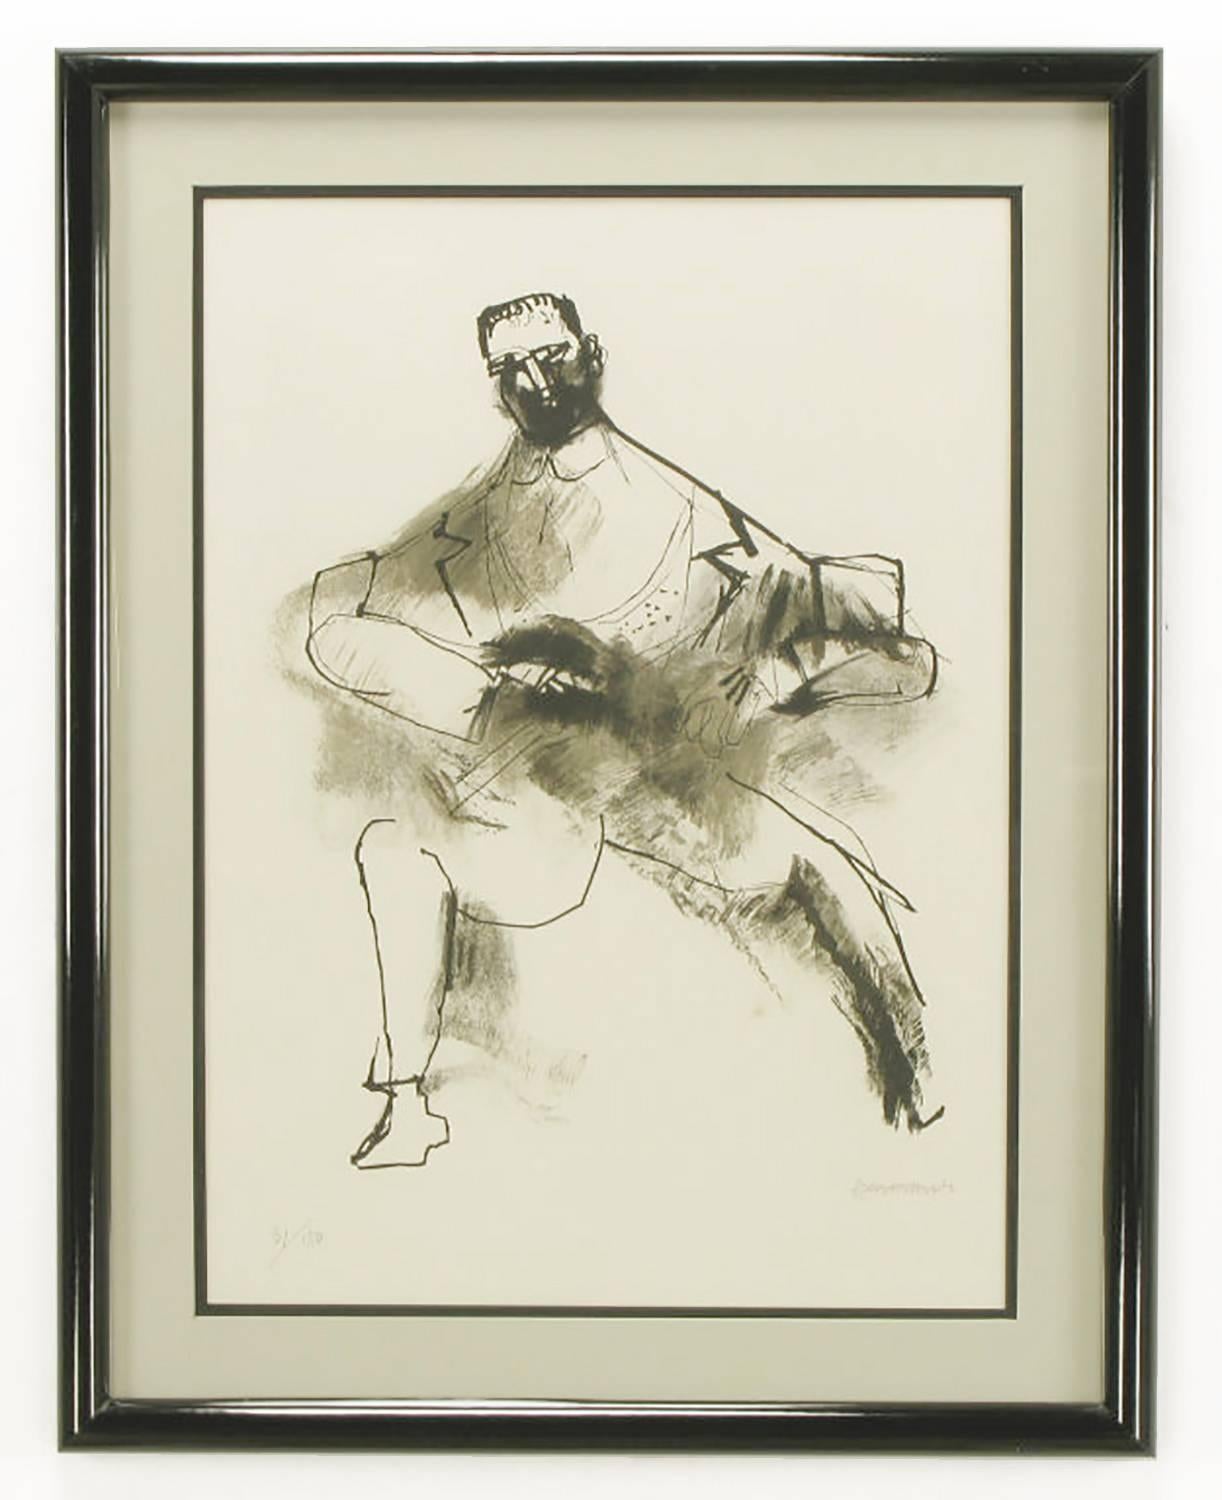 Abraham Rattner (1893-1978) signed and numbered limited edition abstract print of a man and his dog. Black and white with grey matting and black lacquered wood frame.

Rattner, who lived in Paris from 1920-1940, knew and studied the works of